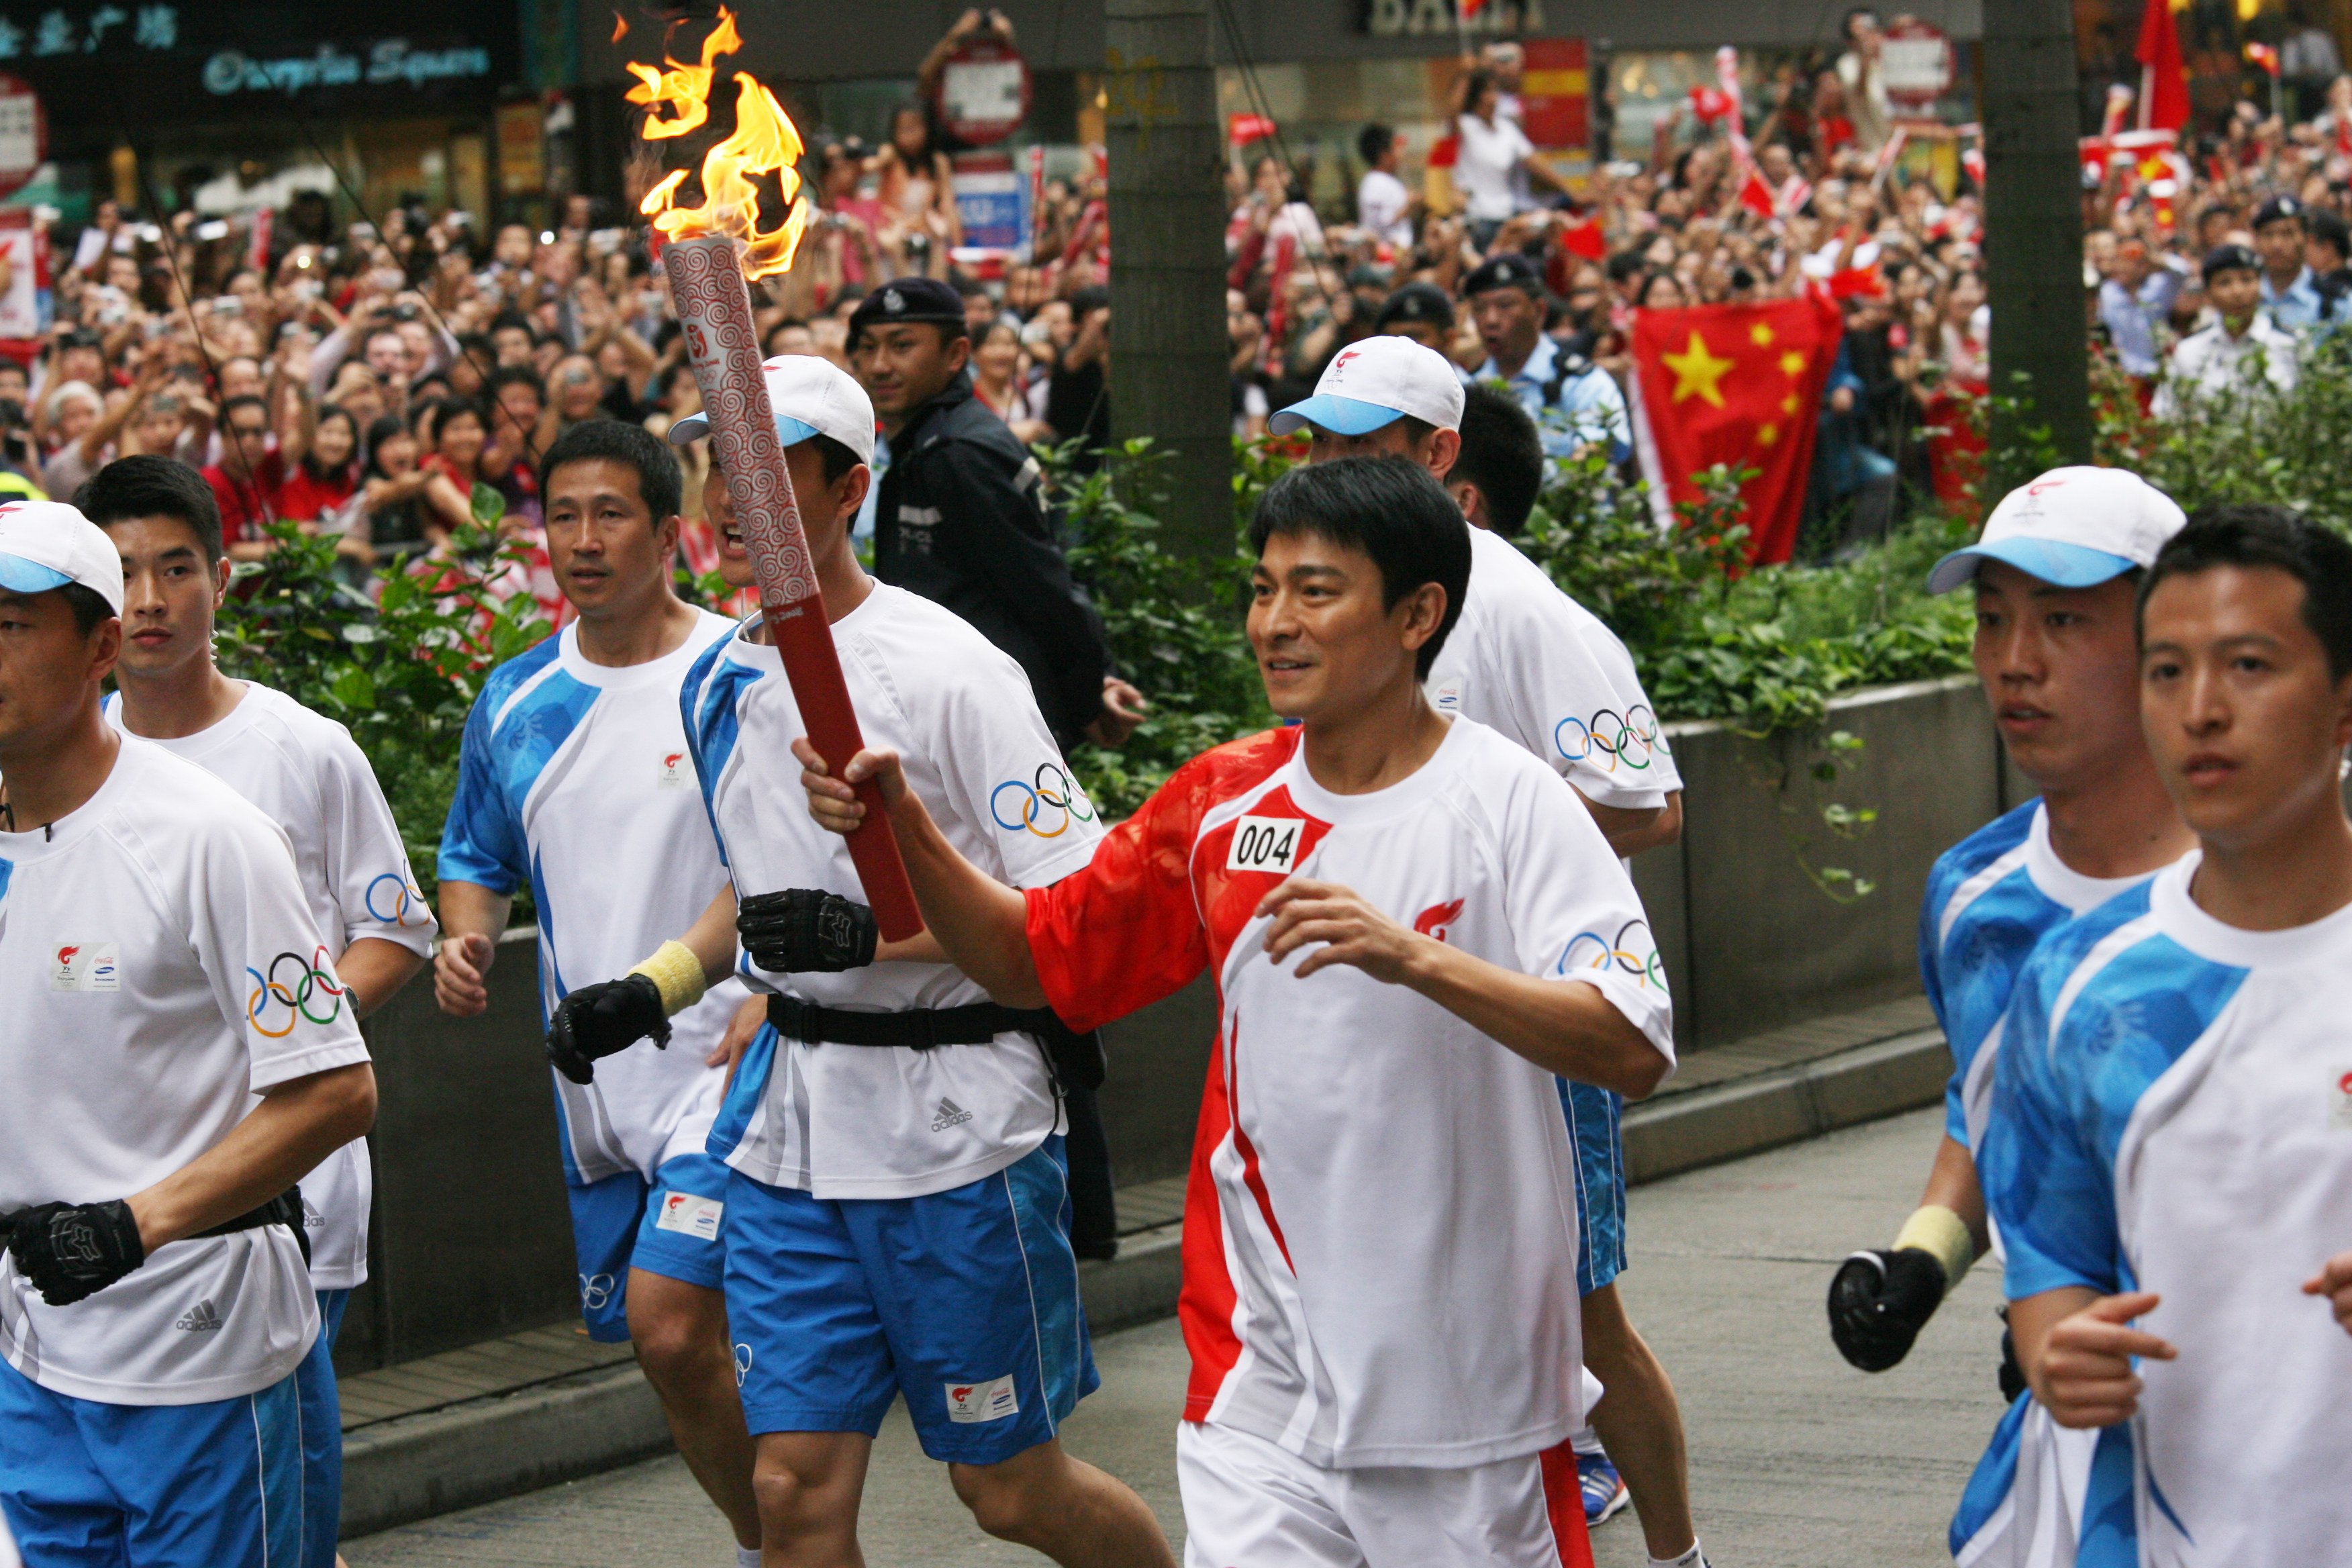 Canto-pop superstar Andy Lau carries the Olympic torch through Tsim Sha Tsui on May 2, 2008. Photo: Oliver Tsang